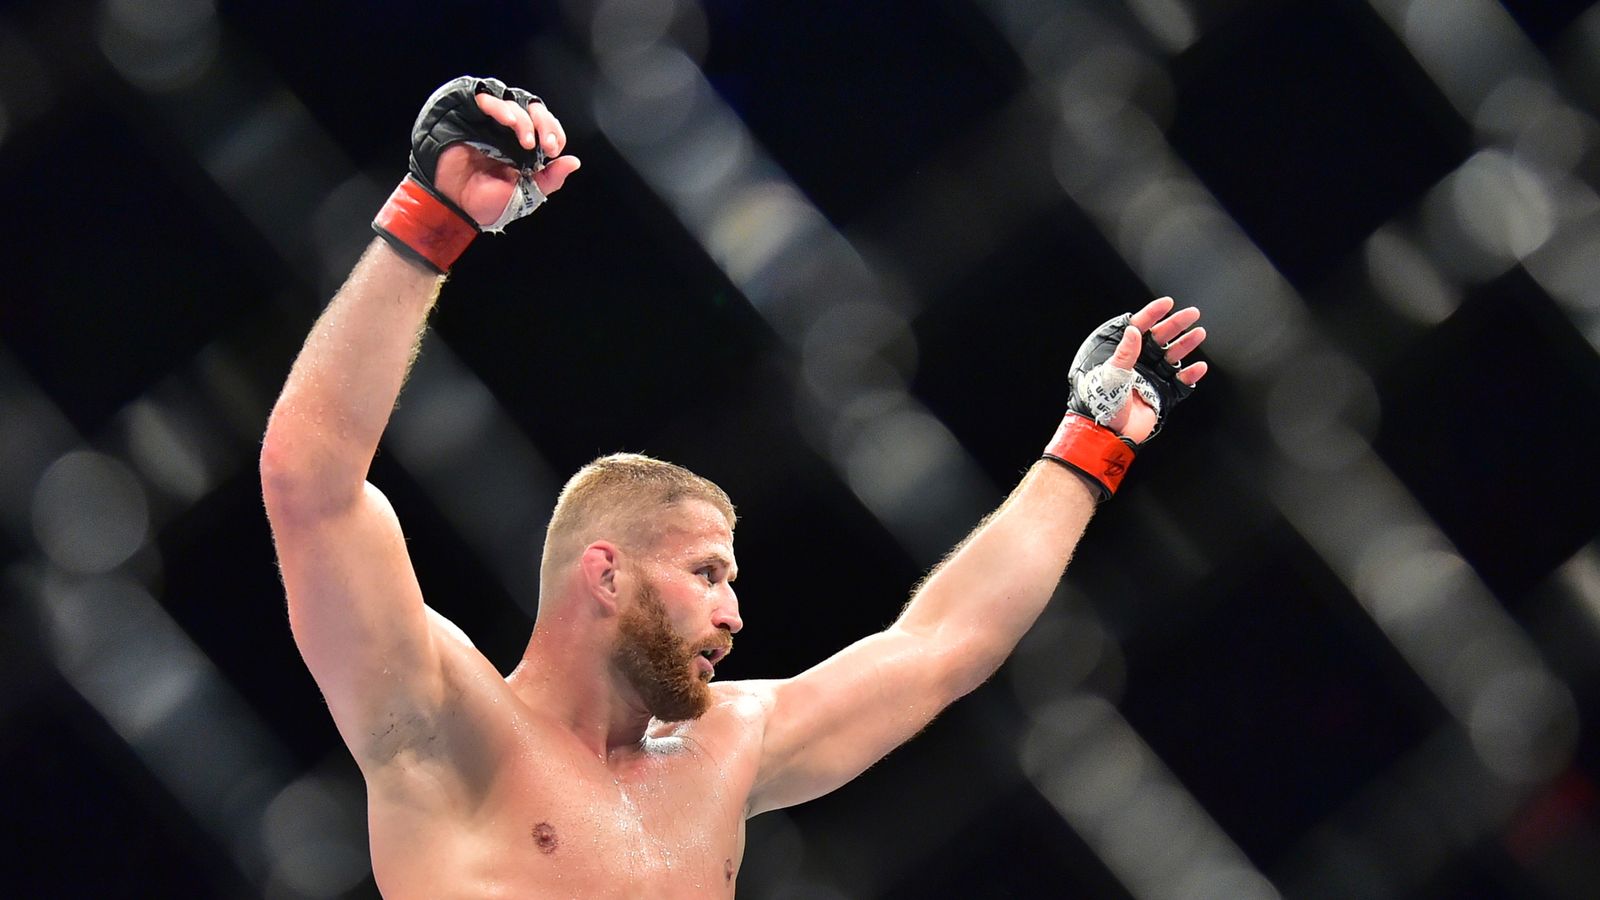 UFC 267: Jan Blachowicz says that although winning is everything, it tastes even better after a good fight